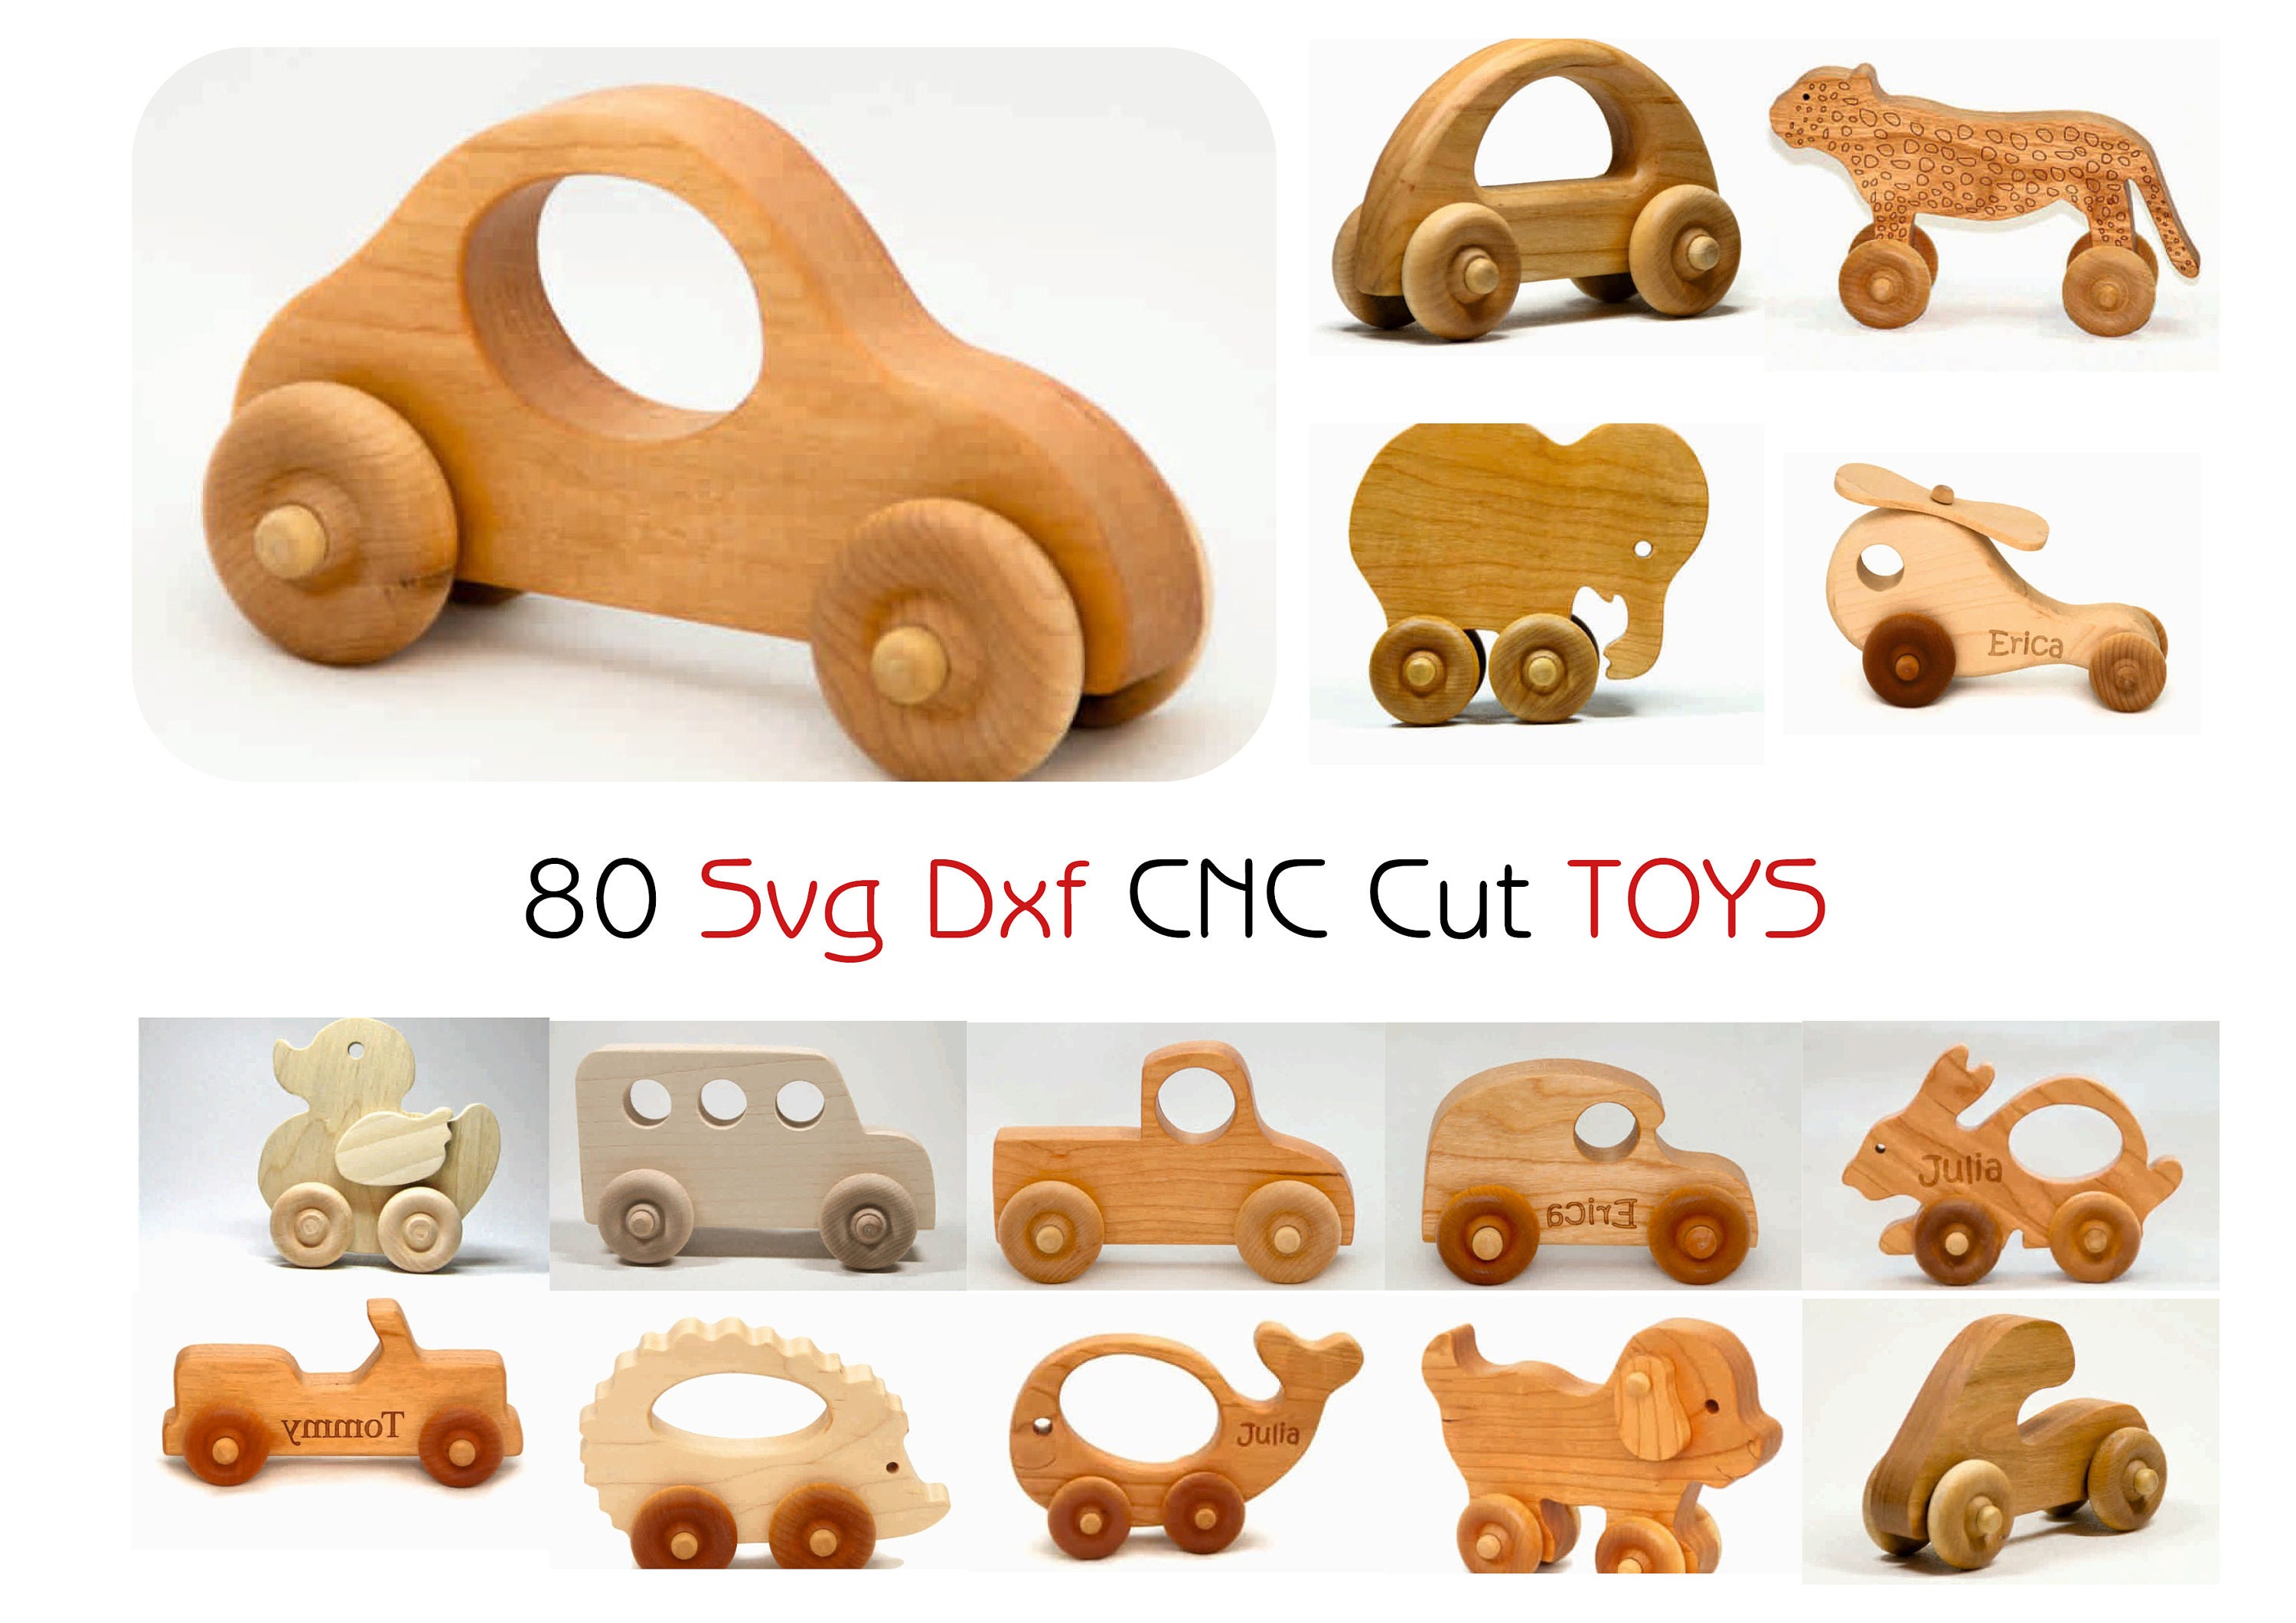 624 Peg Board Toy Images, Stock Photos, 3D objects, & Vectors